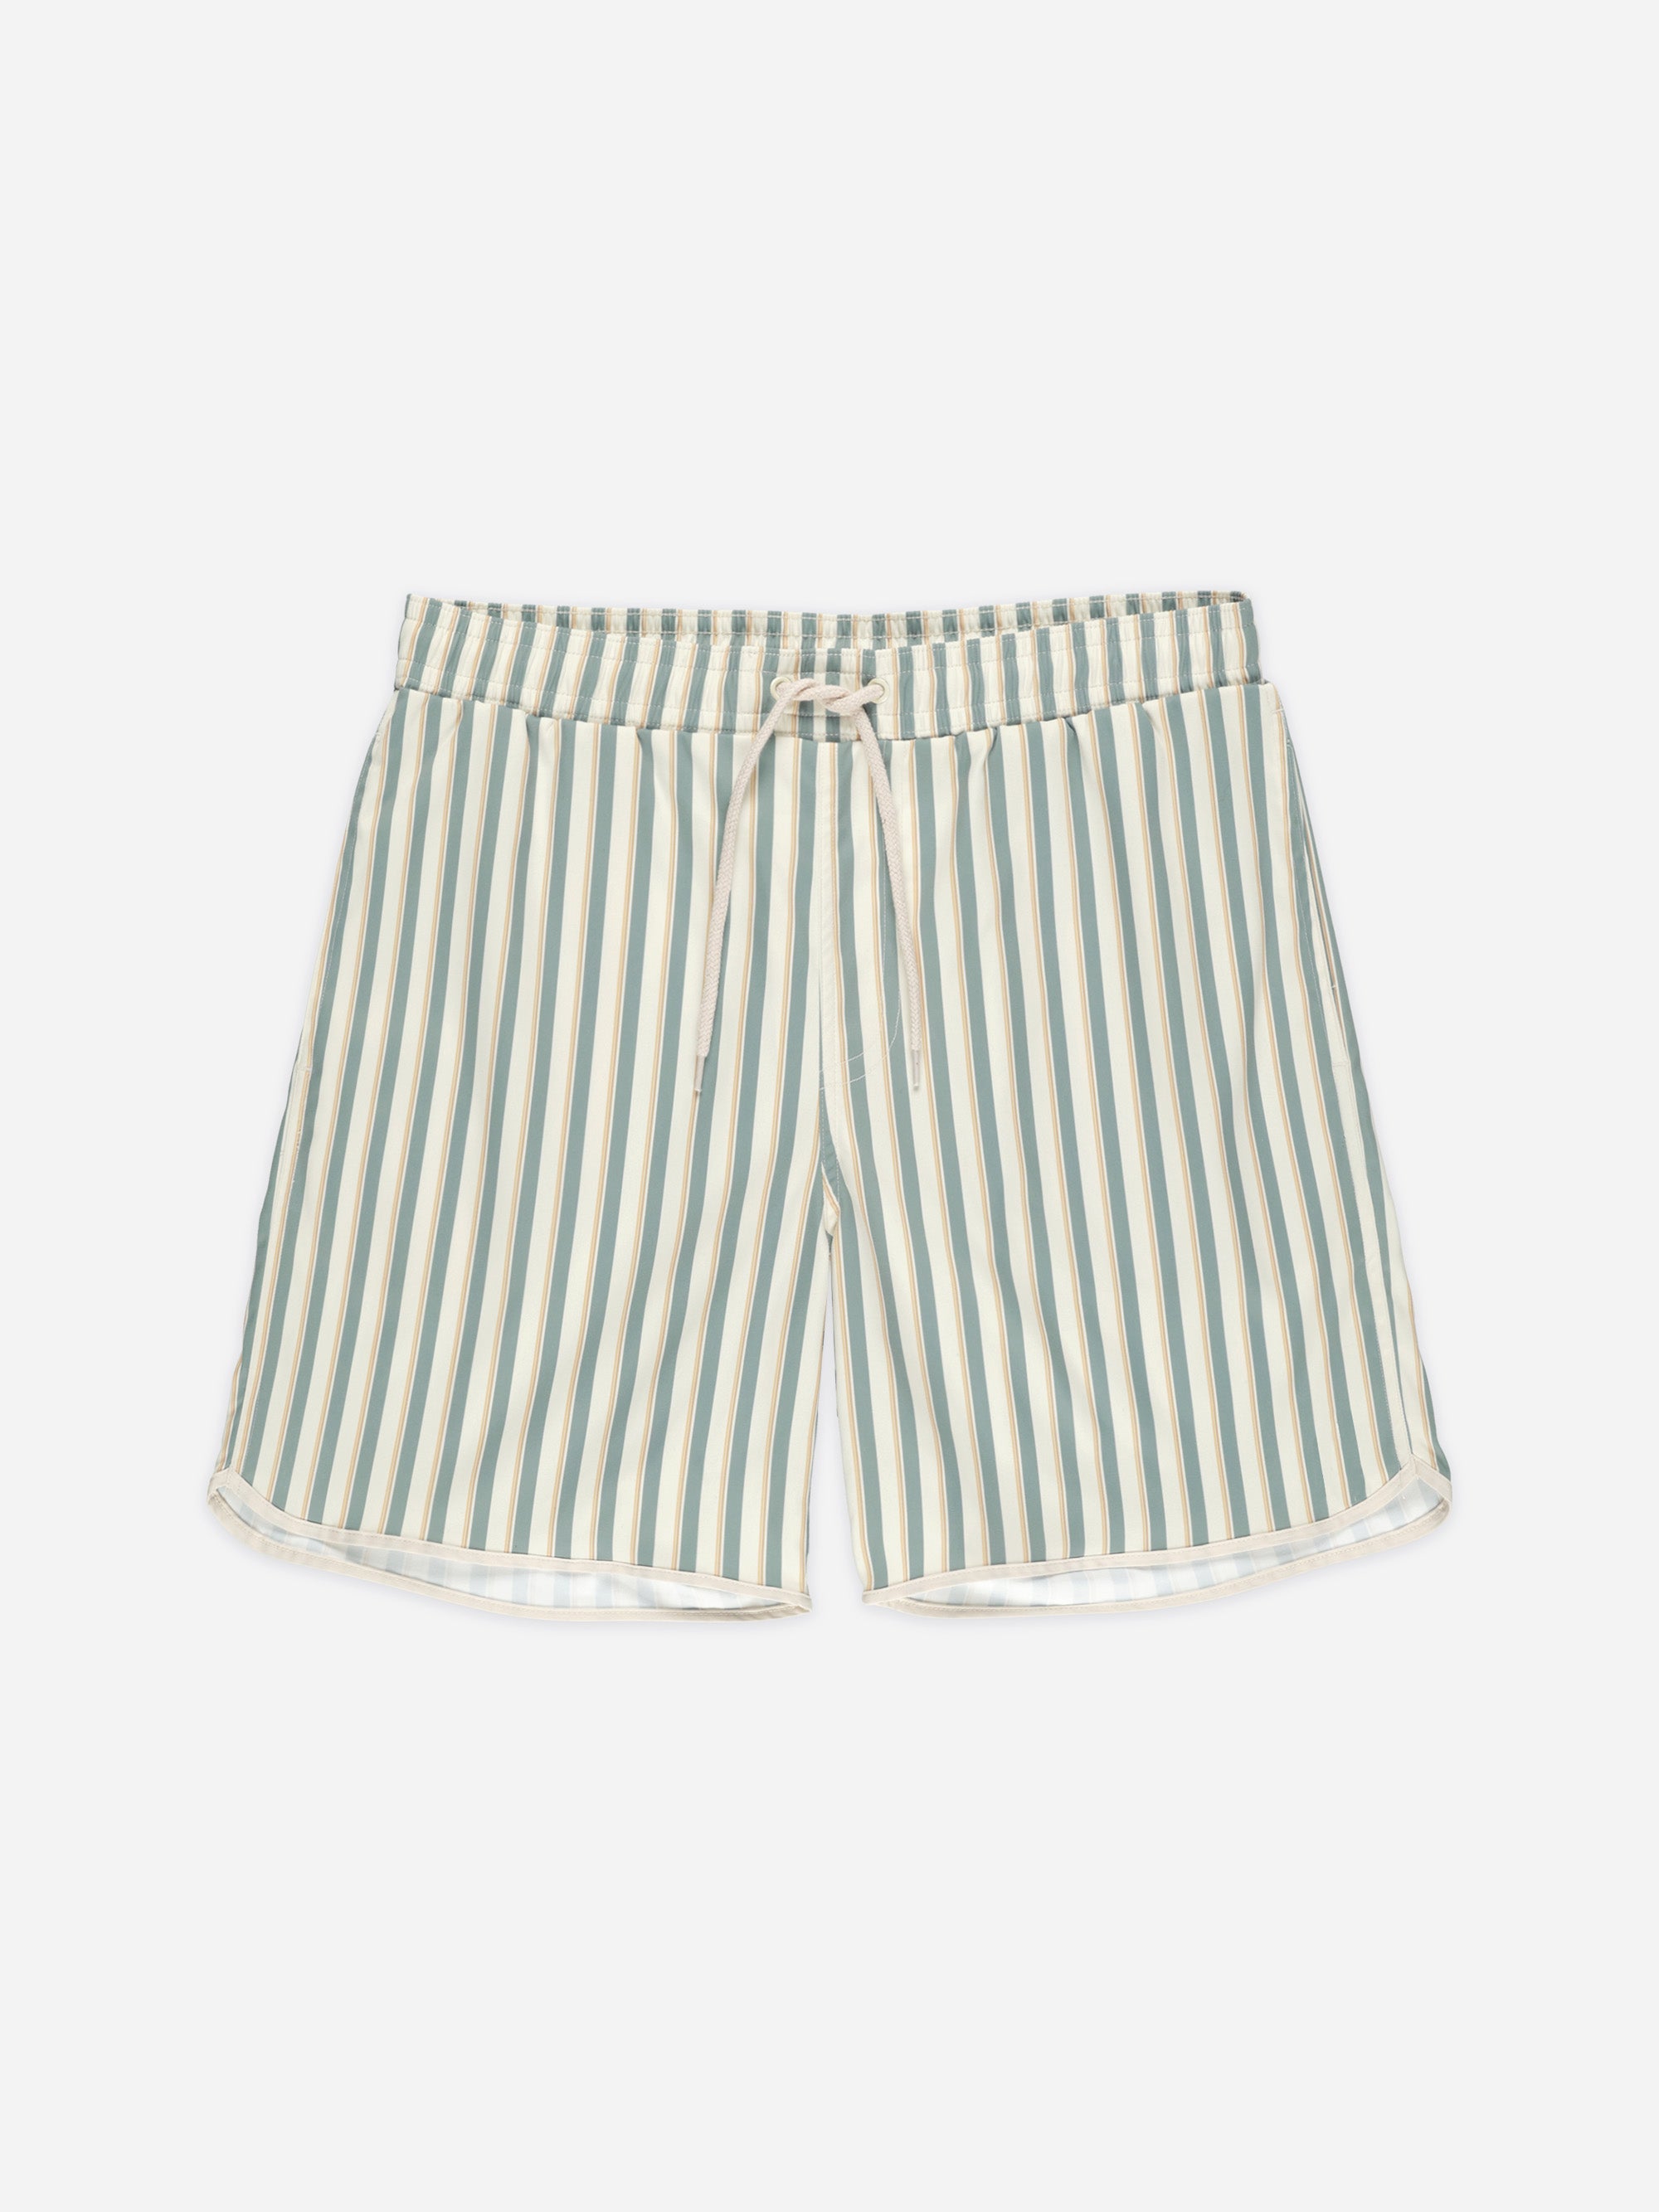 Dolphin Boardshort | Aqua Stripe - Rylee + Cru | Kids Clothes | Trendy Baby Clothes | Modern Infant Outfits |